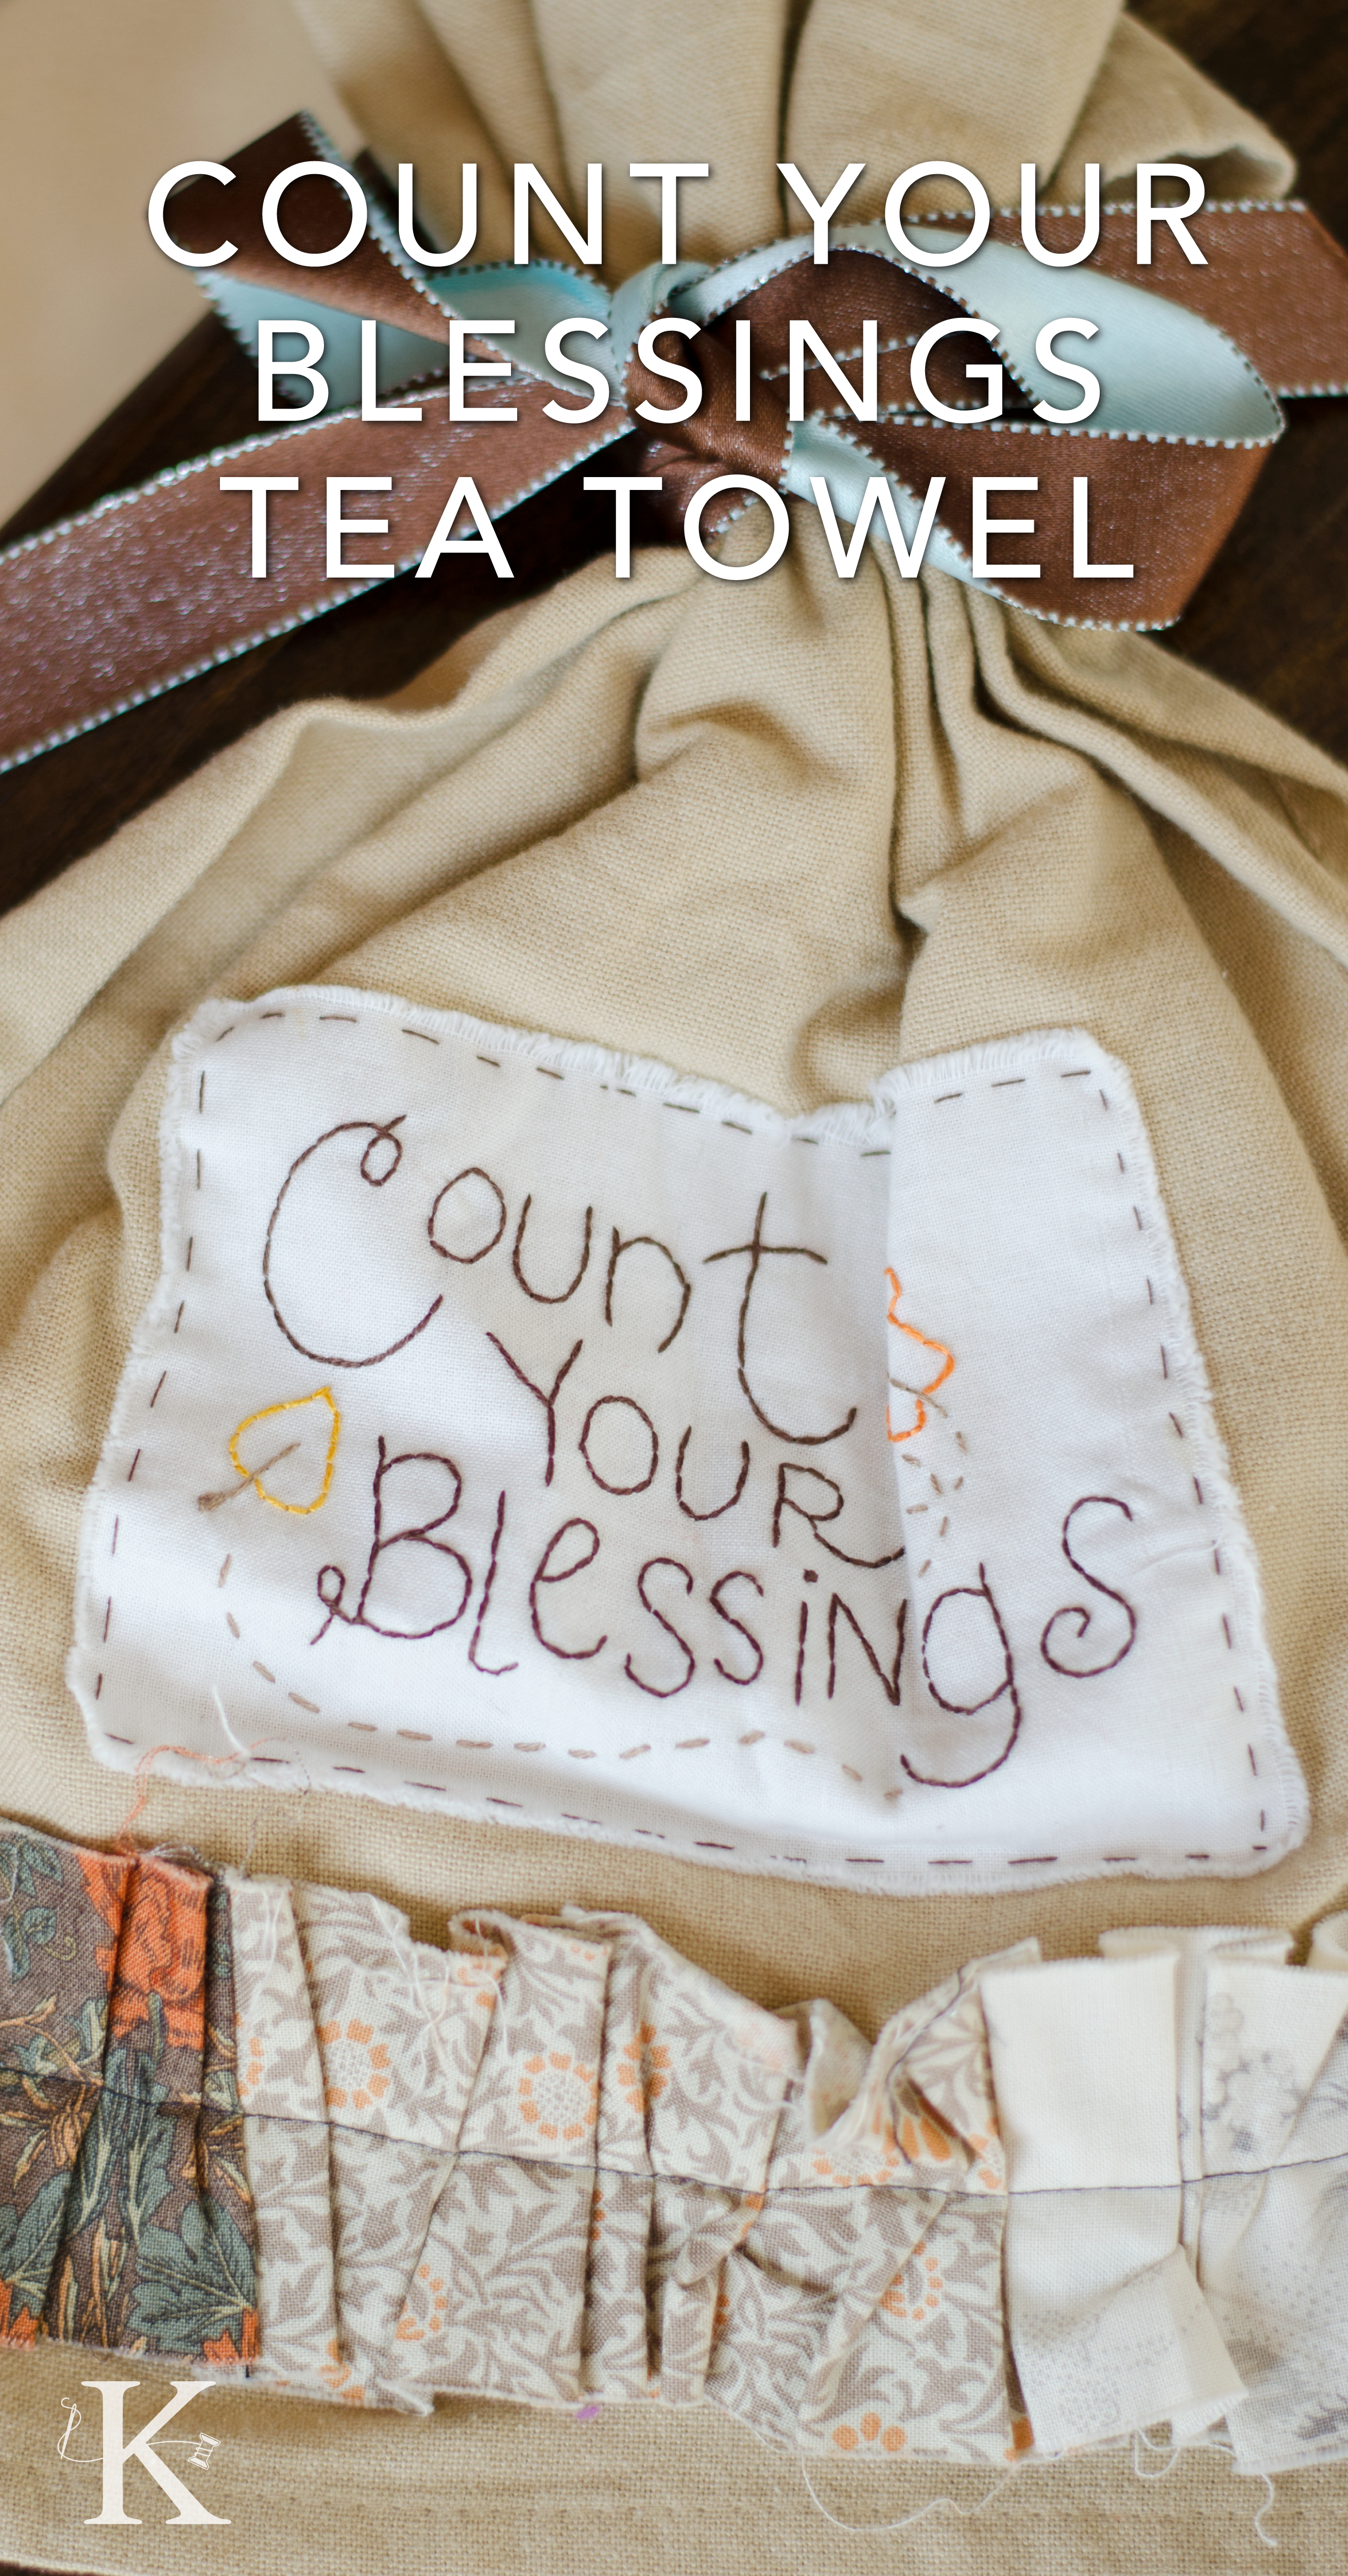 Blog-Images-Count-Blessings-01